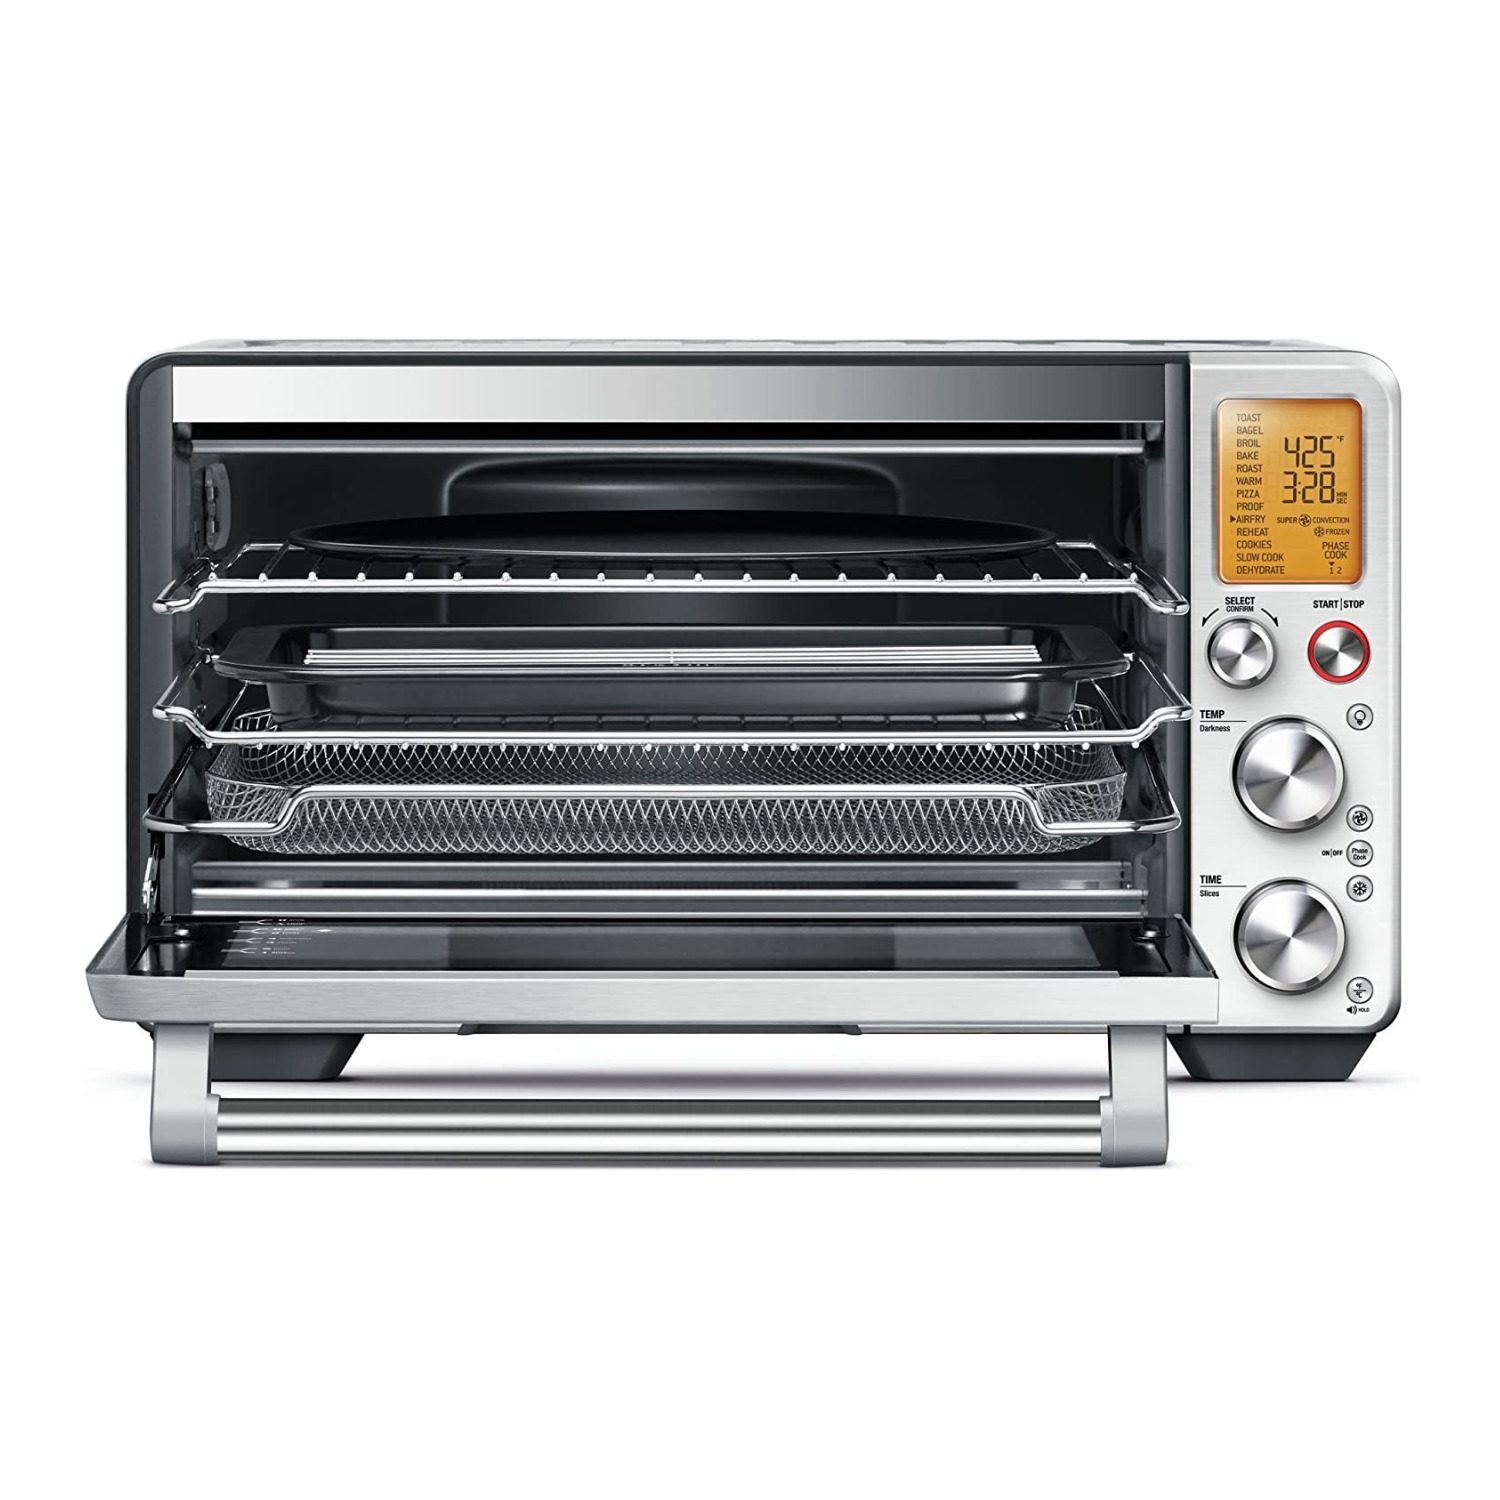 Breville BOV900BSS Convection and Air Fry Smart Oven Air - image 2 of 3